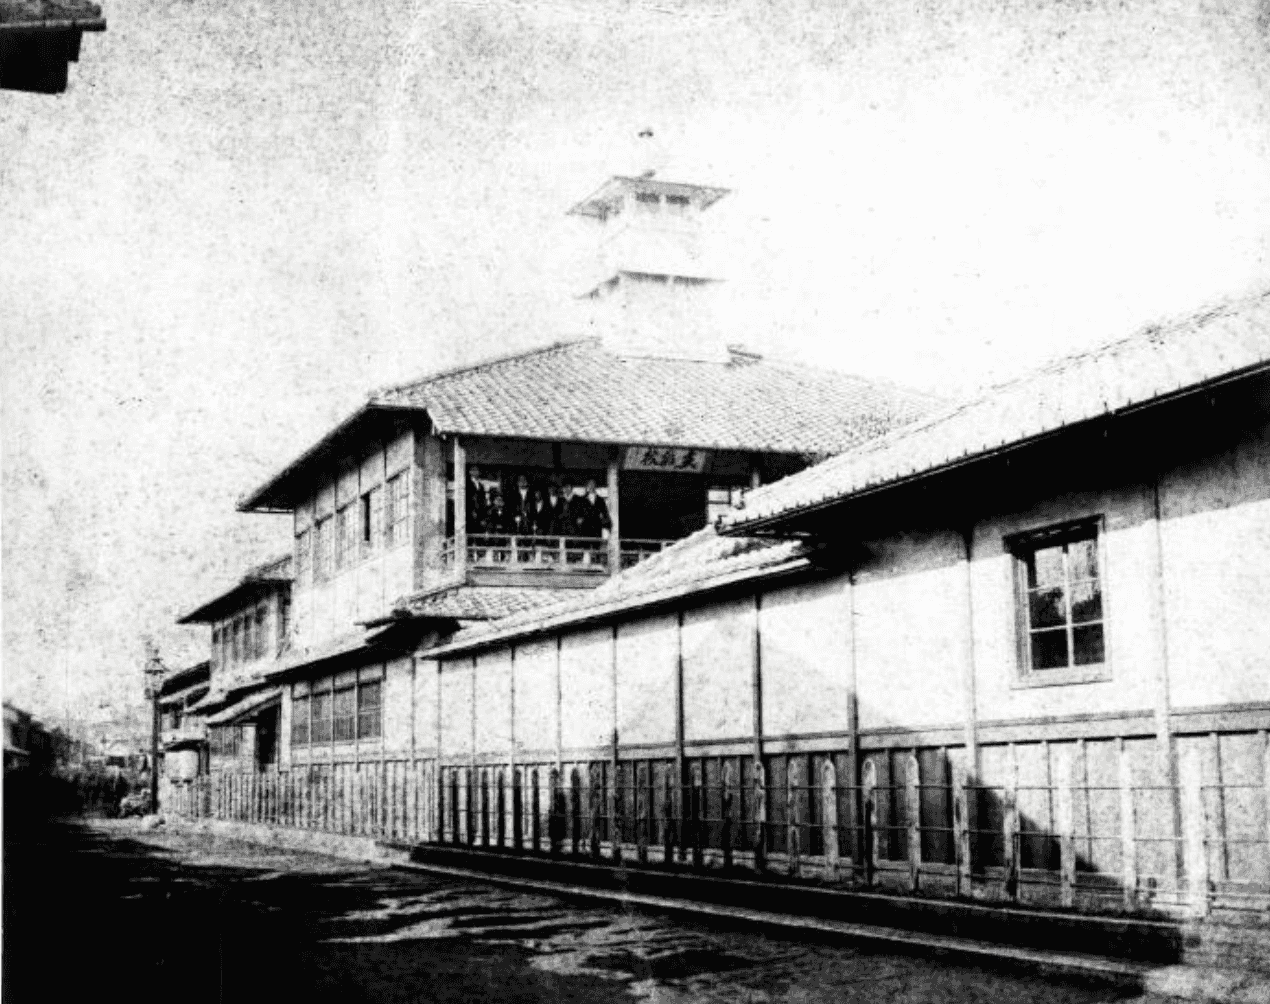 Rissei Elementary School, in the middle of the Meiji era, Source: Kyoto Municipal Museum of School History